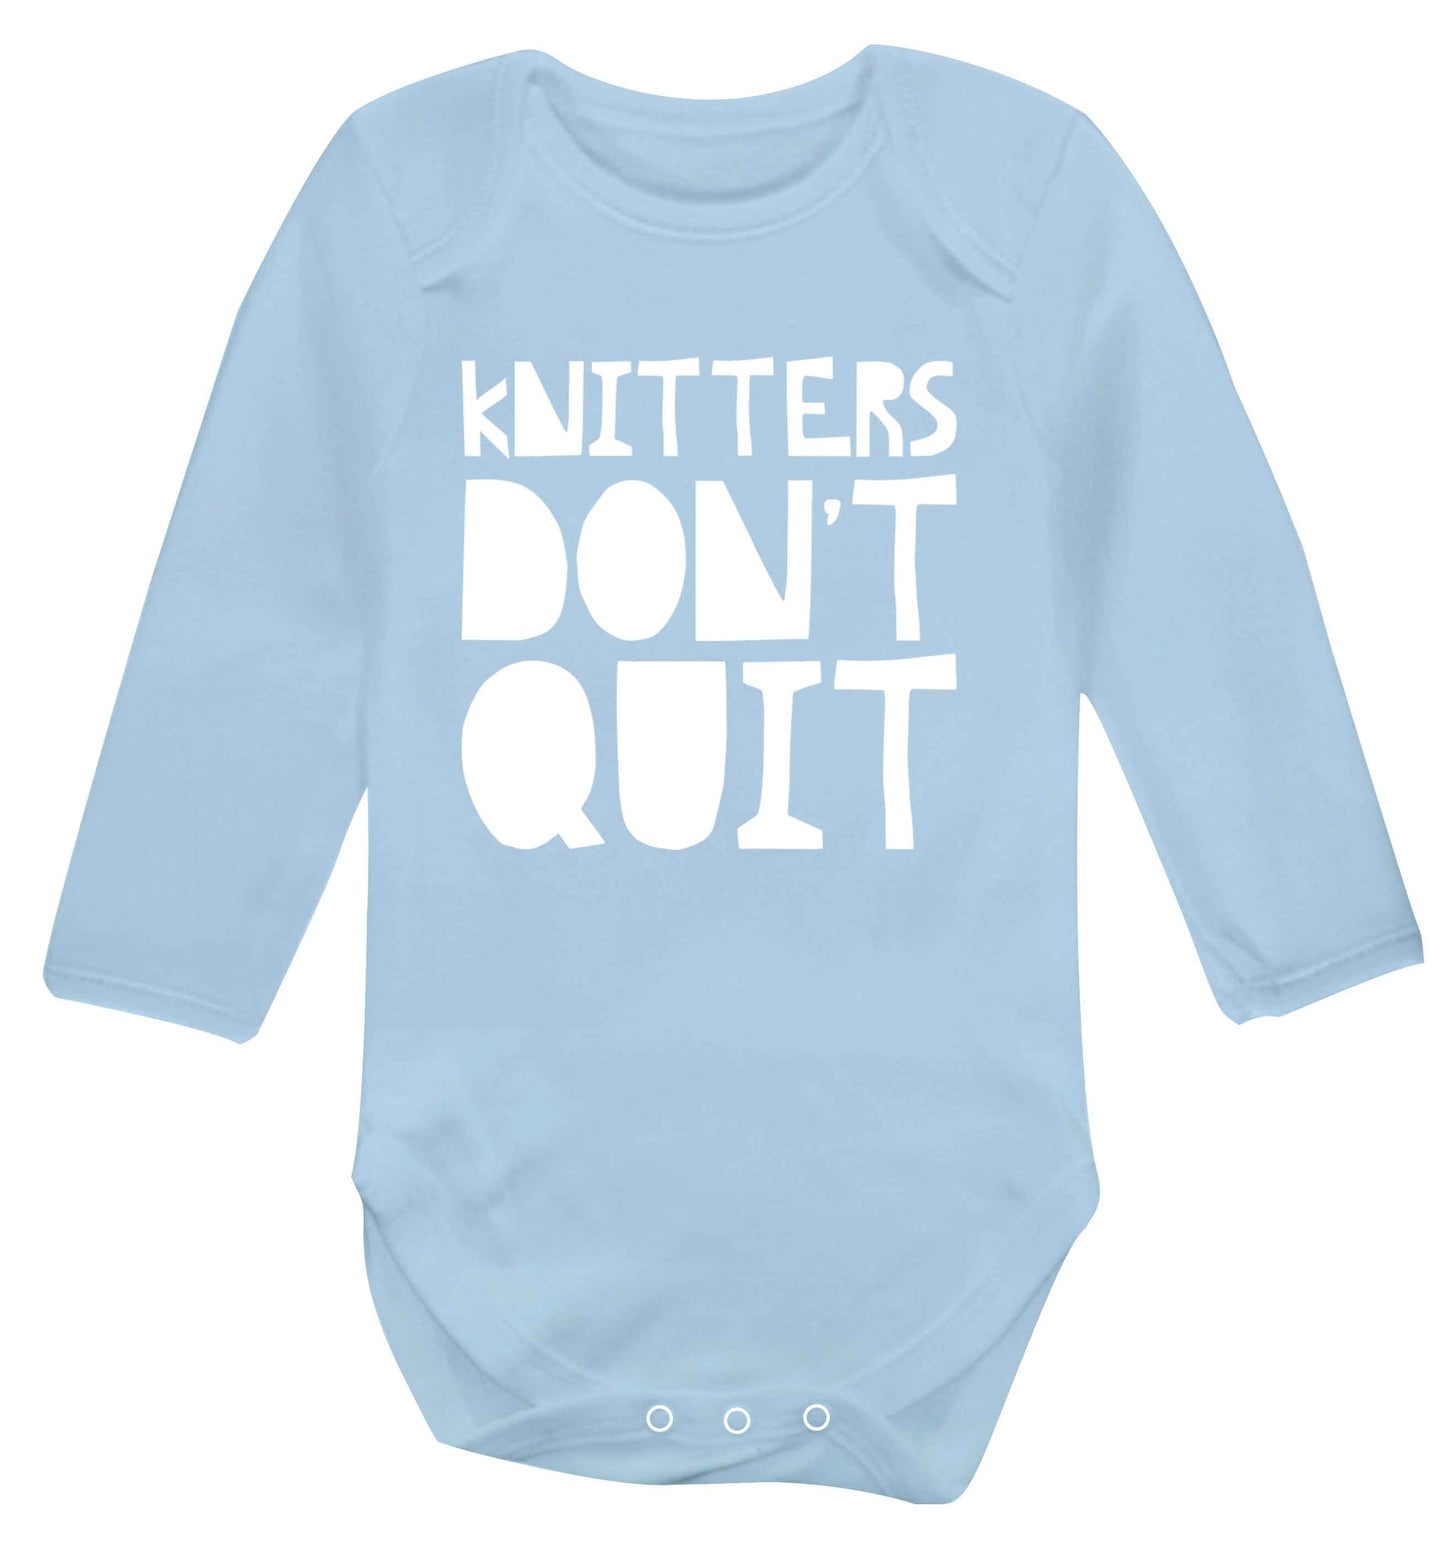 Knitters don't quit Baby Vest long sleeved pale blue 6-12 months